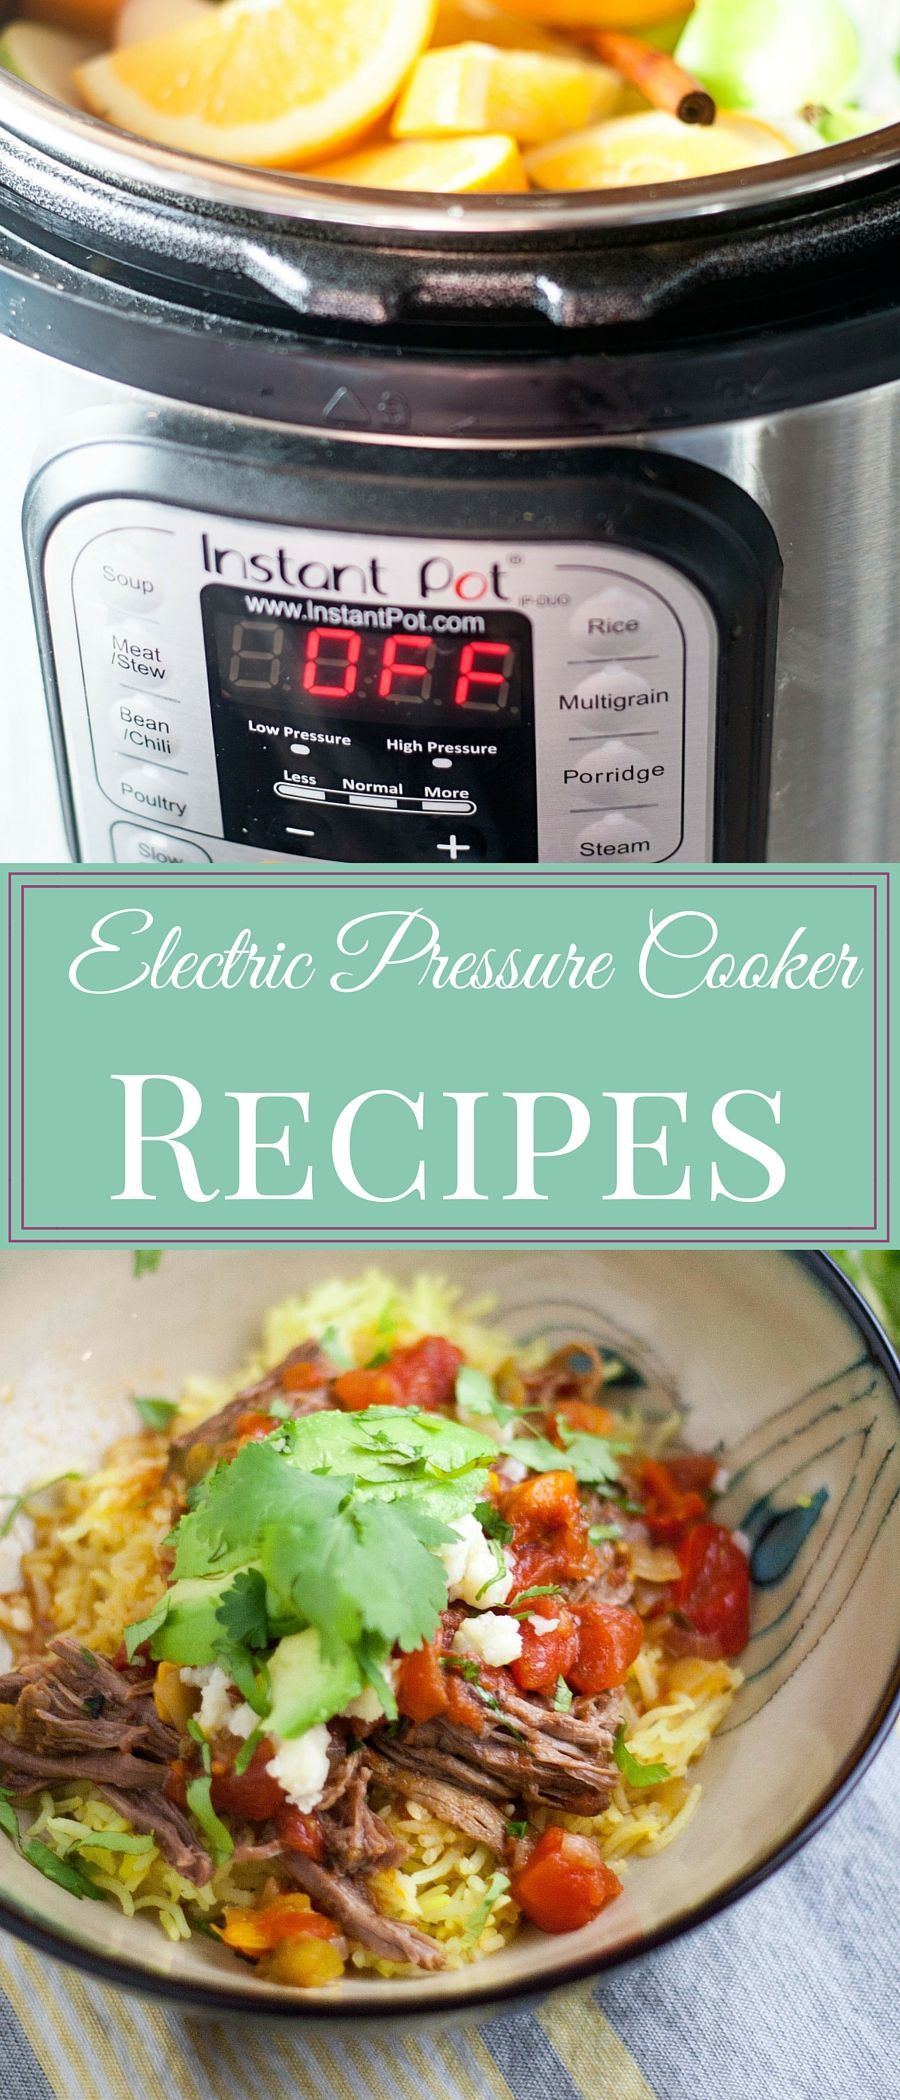 Learn to use that electric pressure cooker! Recipes, videos and more!